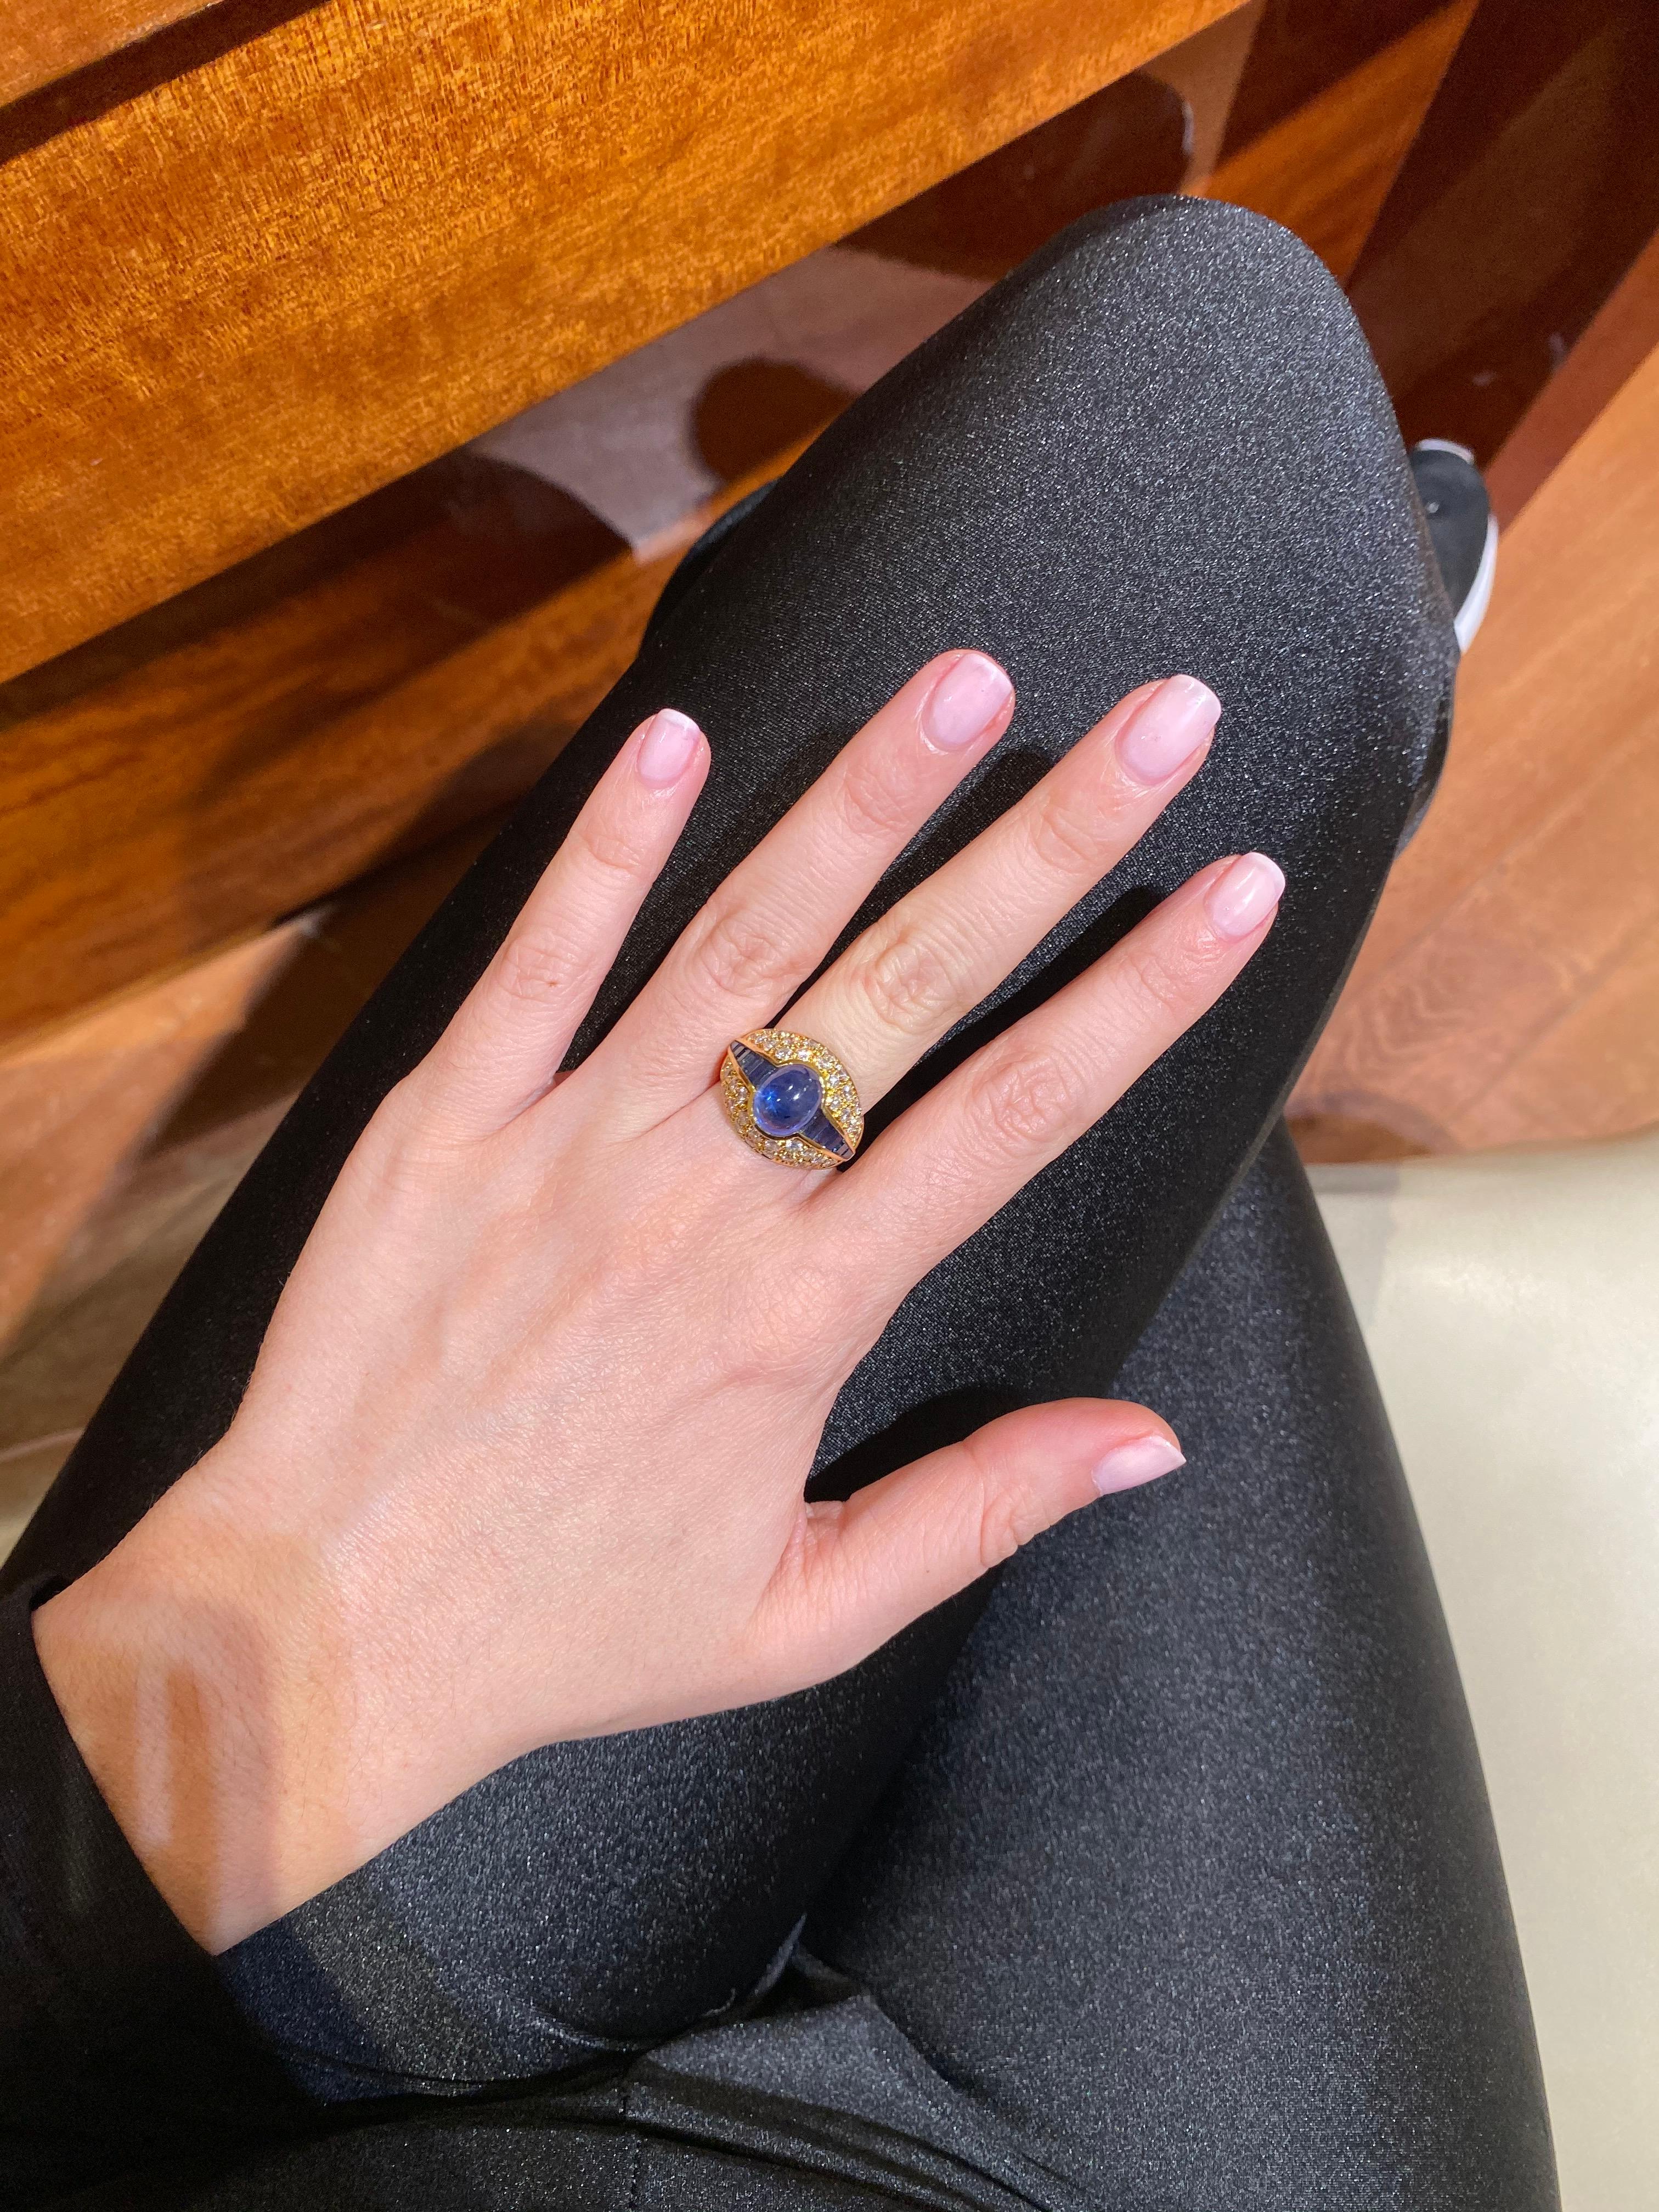 Hammerman Jewels 18k Yellow Gold Sapphire and Diamond Ring with cabochon sapphire and custom square cut sapphires. 3 carats of diamonds and 6 carats of sapphires. Size 7.